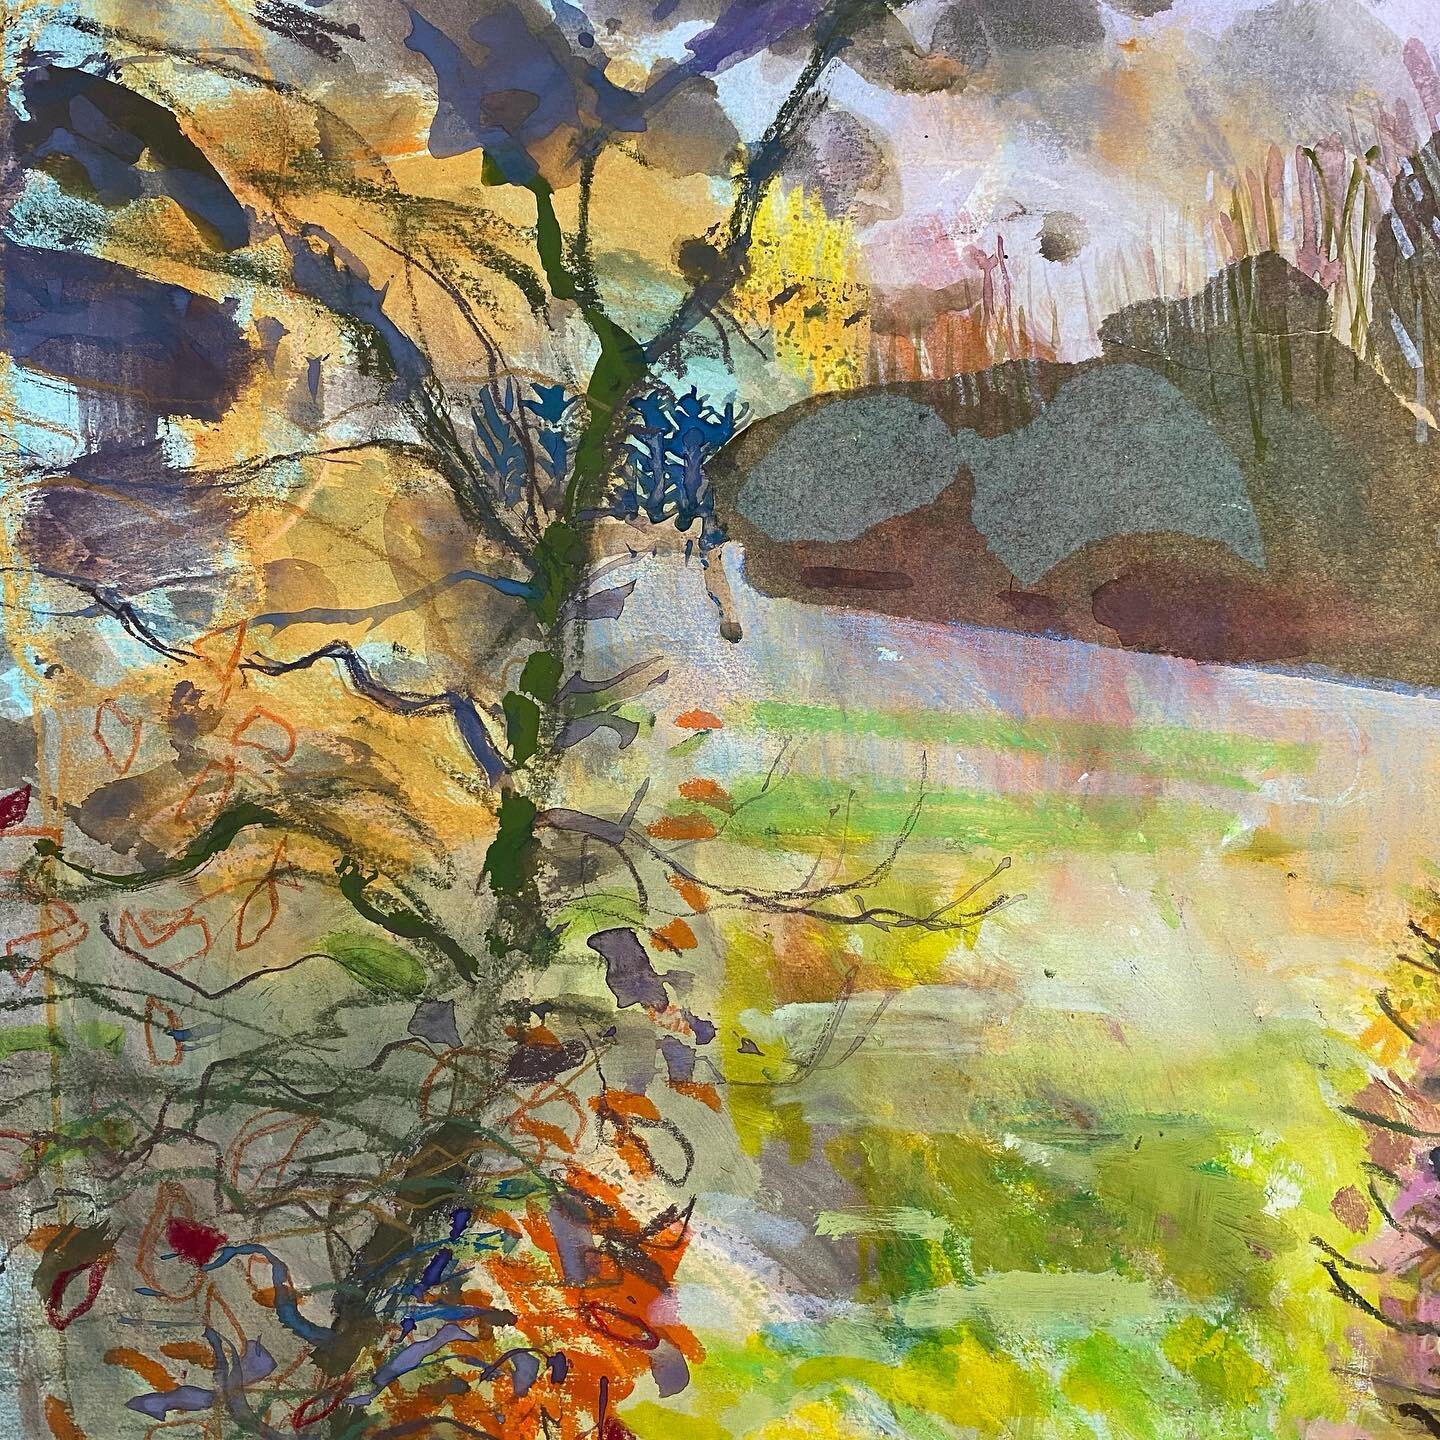 Detail Wip  into the garden from studio. Mixed media collage 
#collage #garden #spring #beech #home #playing #experiment